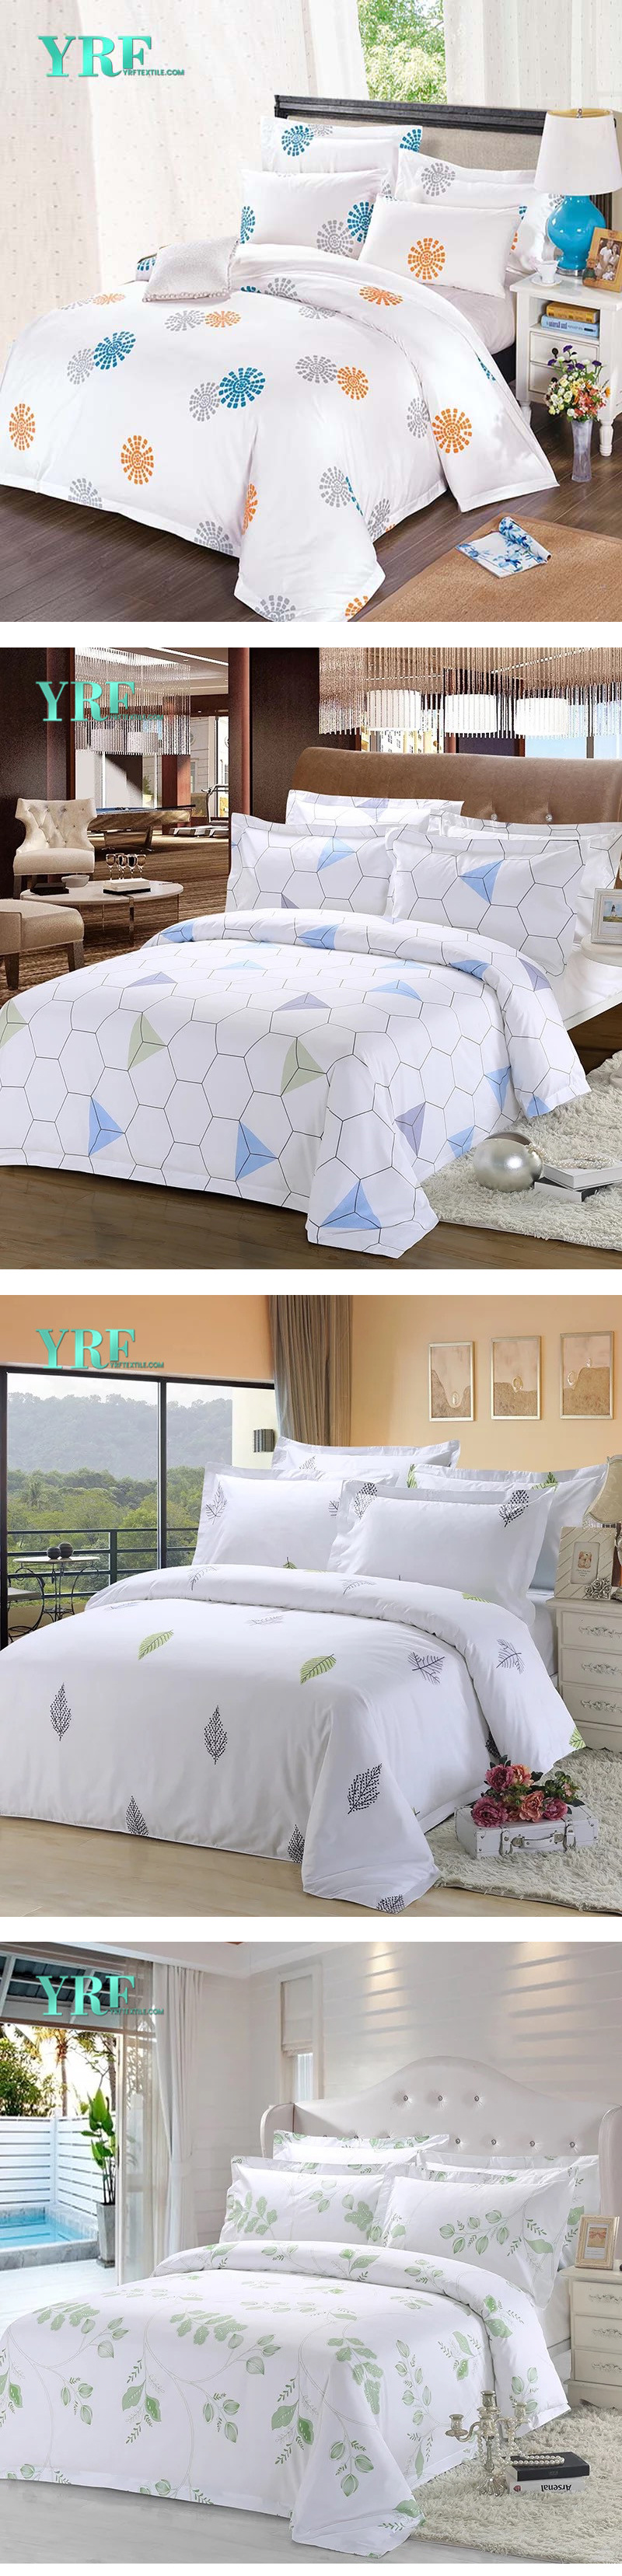 Hot Selling Twin/Double/Queen/King Size Cotton 3D Printed Bedding Set